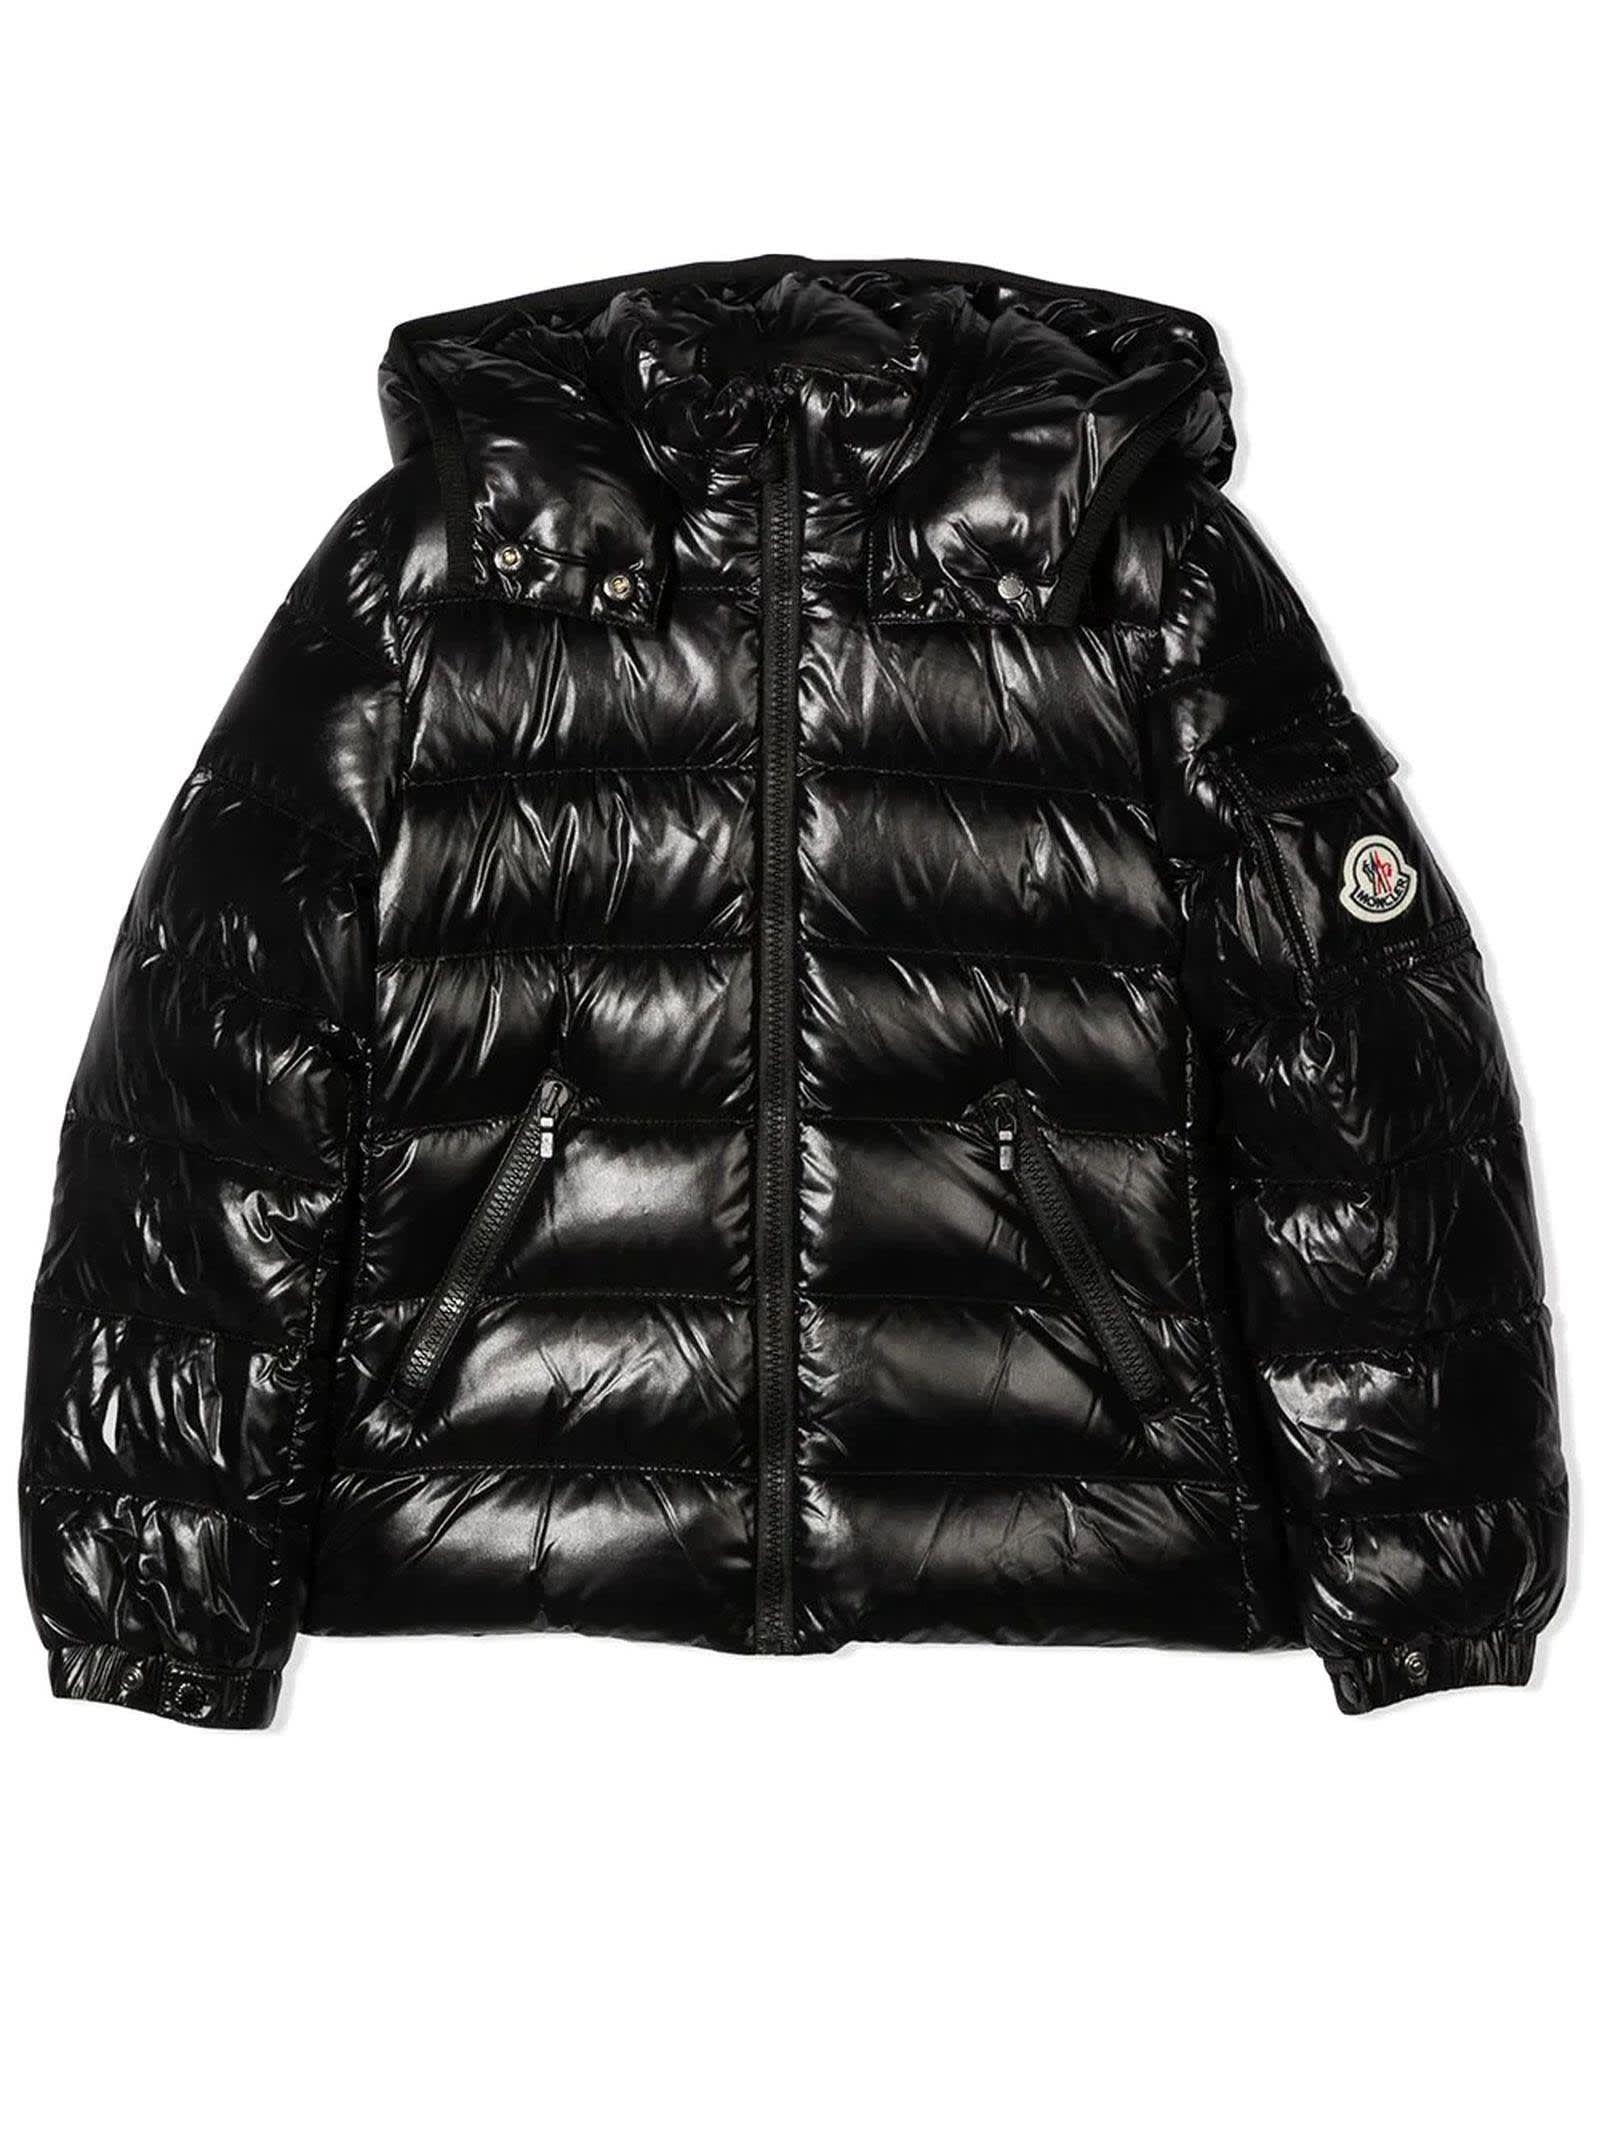 MONCLER BLACK QUILTED DOWN JACKET,1A5271068950K 999